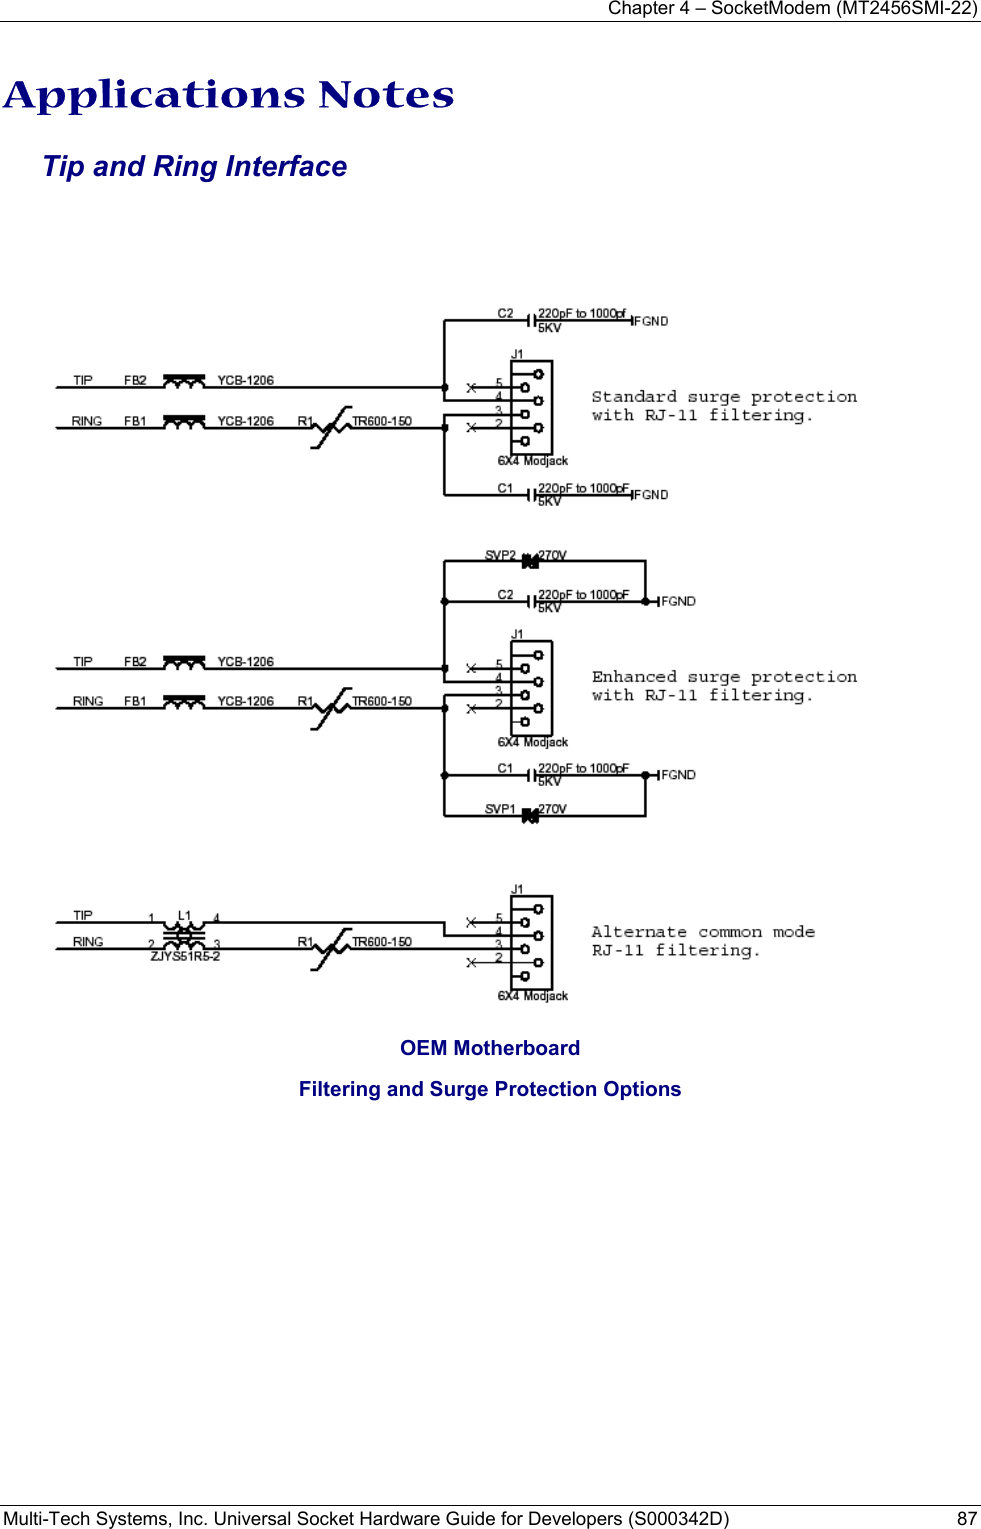 Chapter 4 – SocketModem (MT2456SMI-22) Multi-Tech Systems, Inc. Universal Socket Hardware Guide for Developers (S000342D)  87  Applications Notes Tip and Ring Interface    OEM Motherboard Filtering and Surge Protection Options     